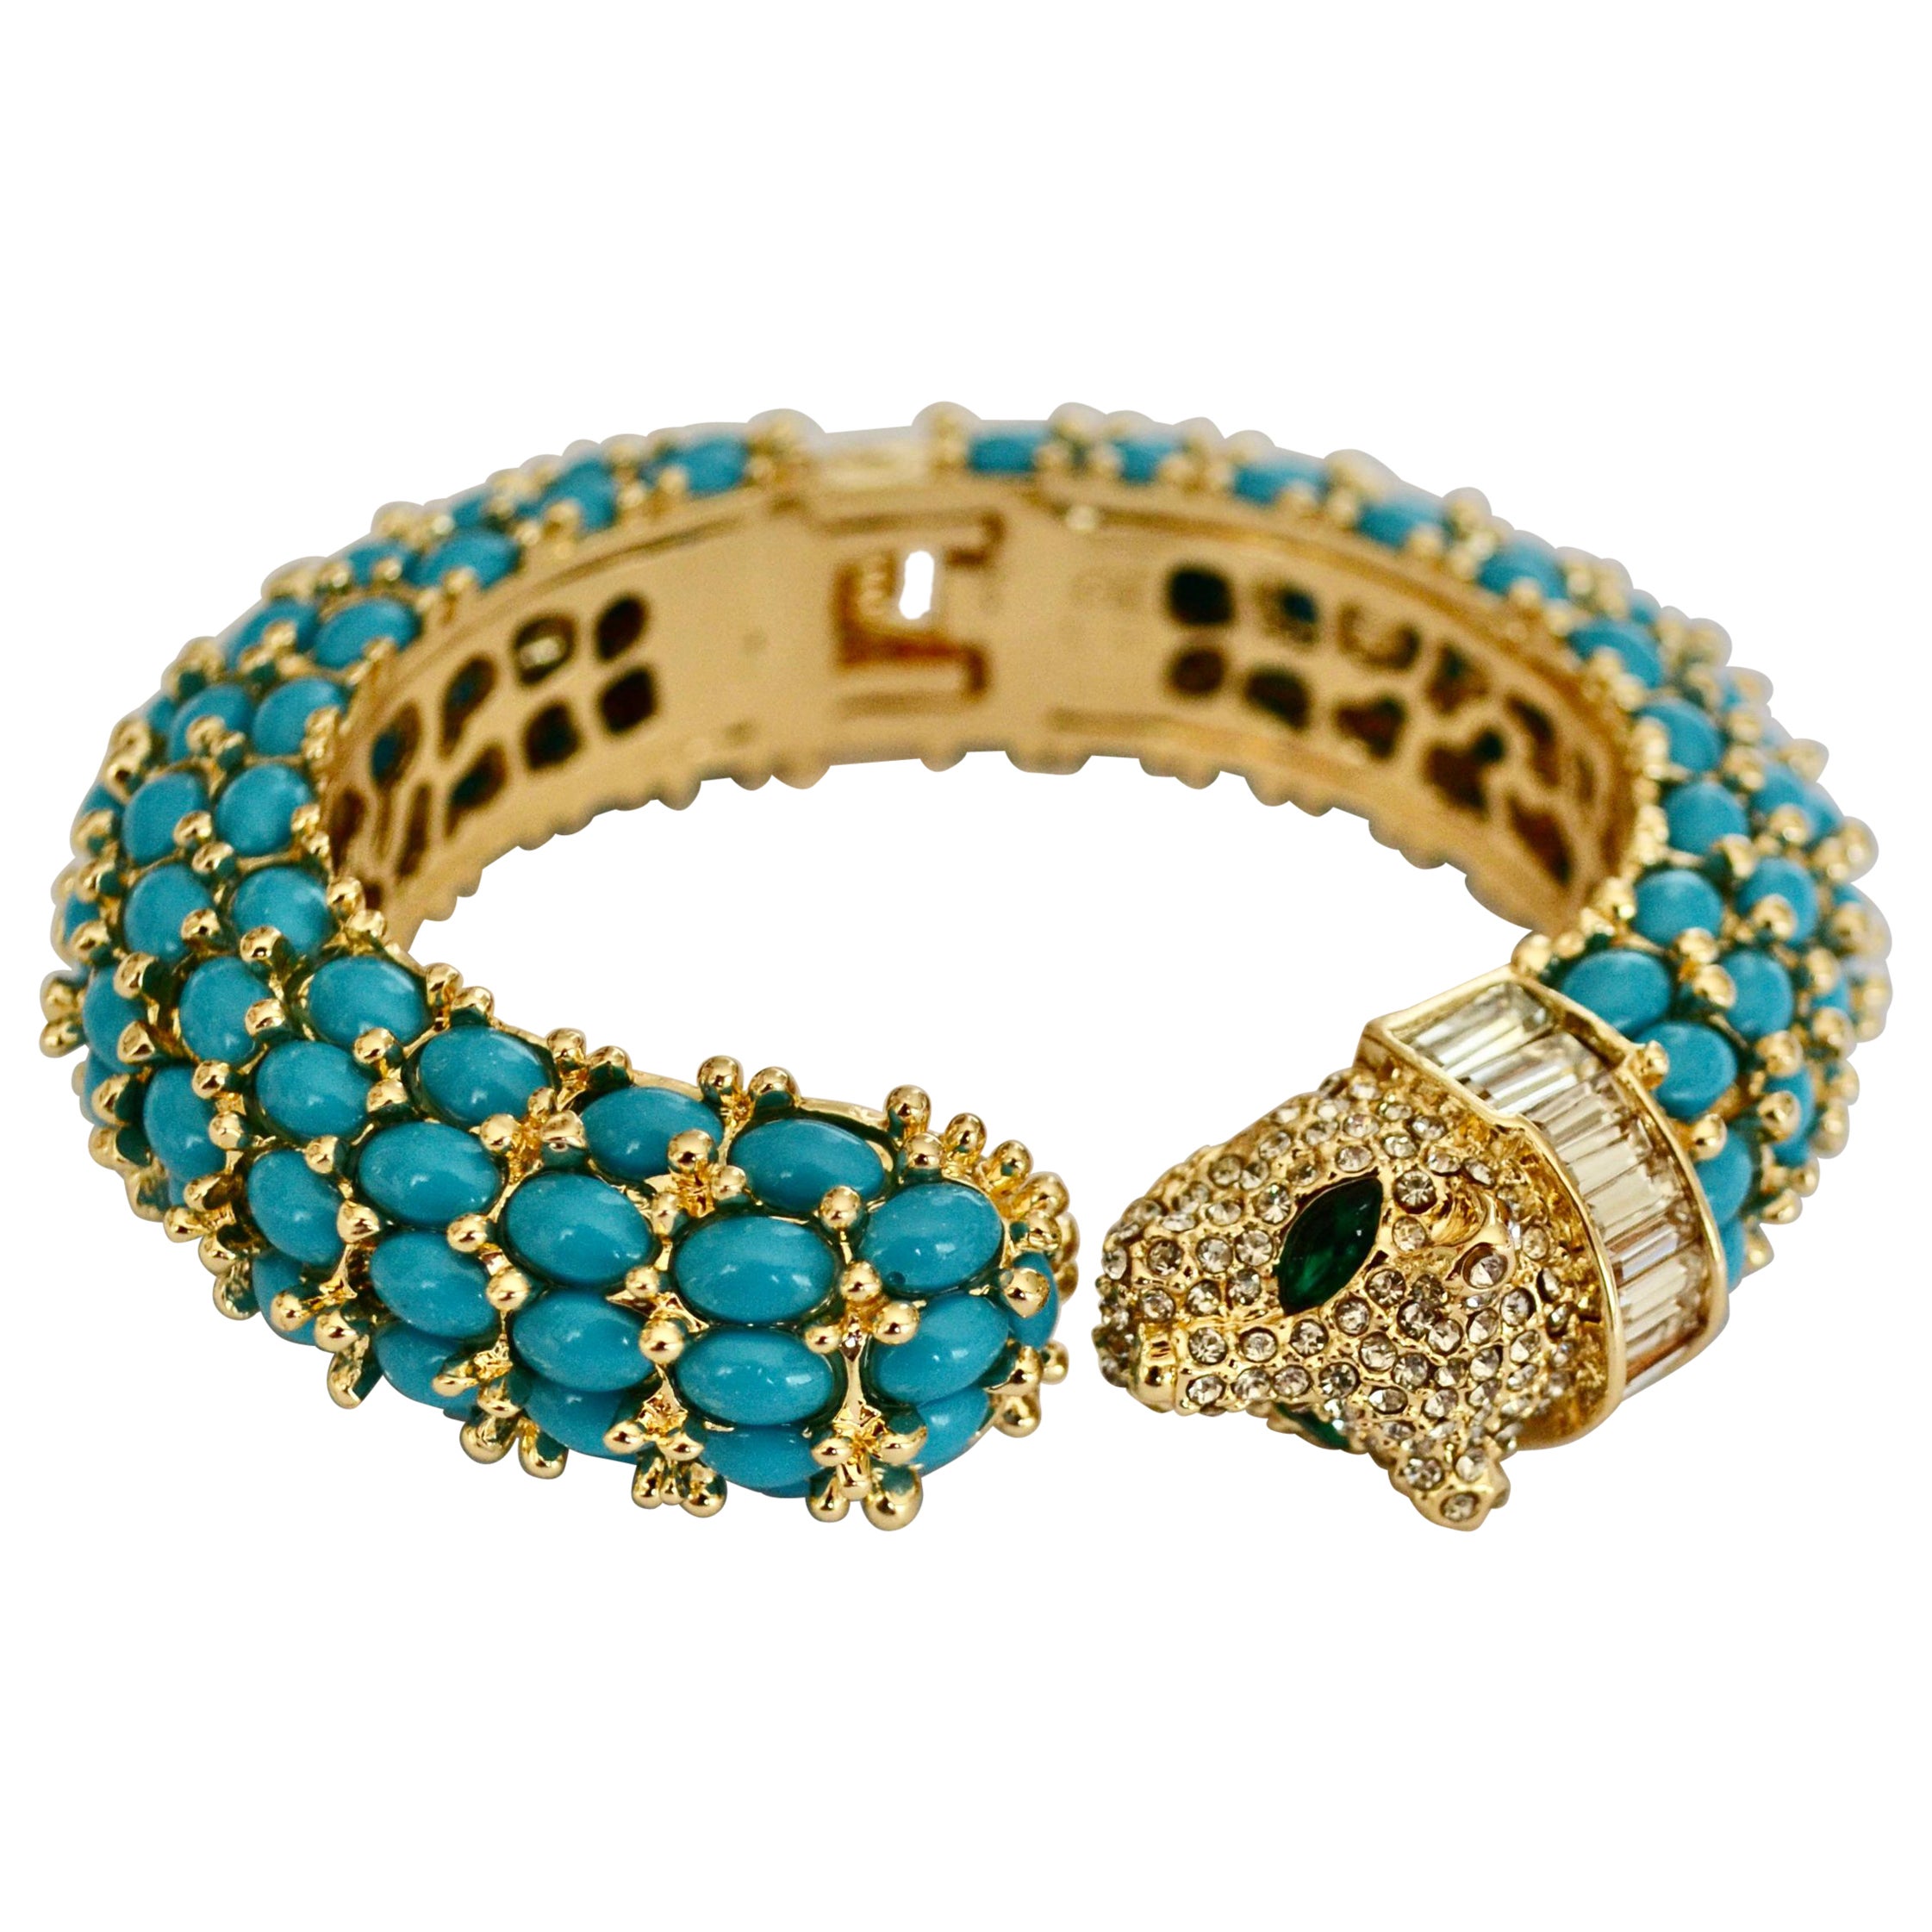 Turquoise and Crystal Panther Bangle